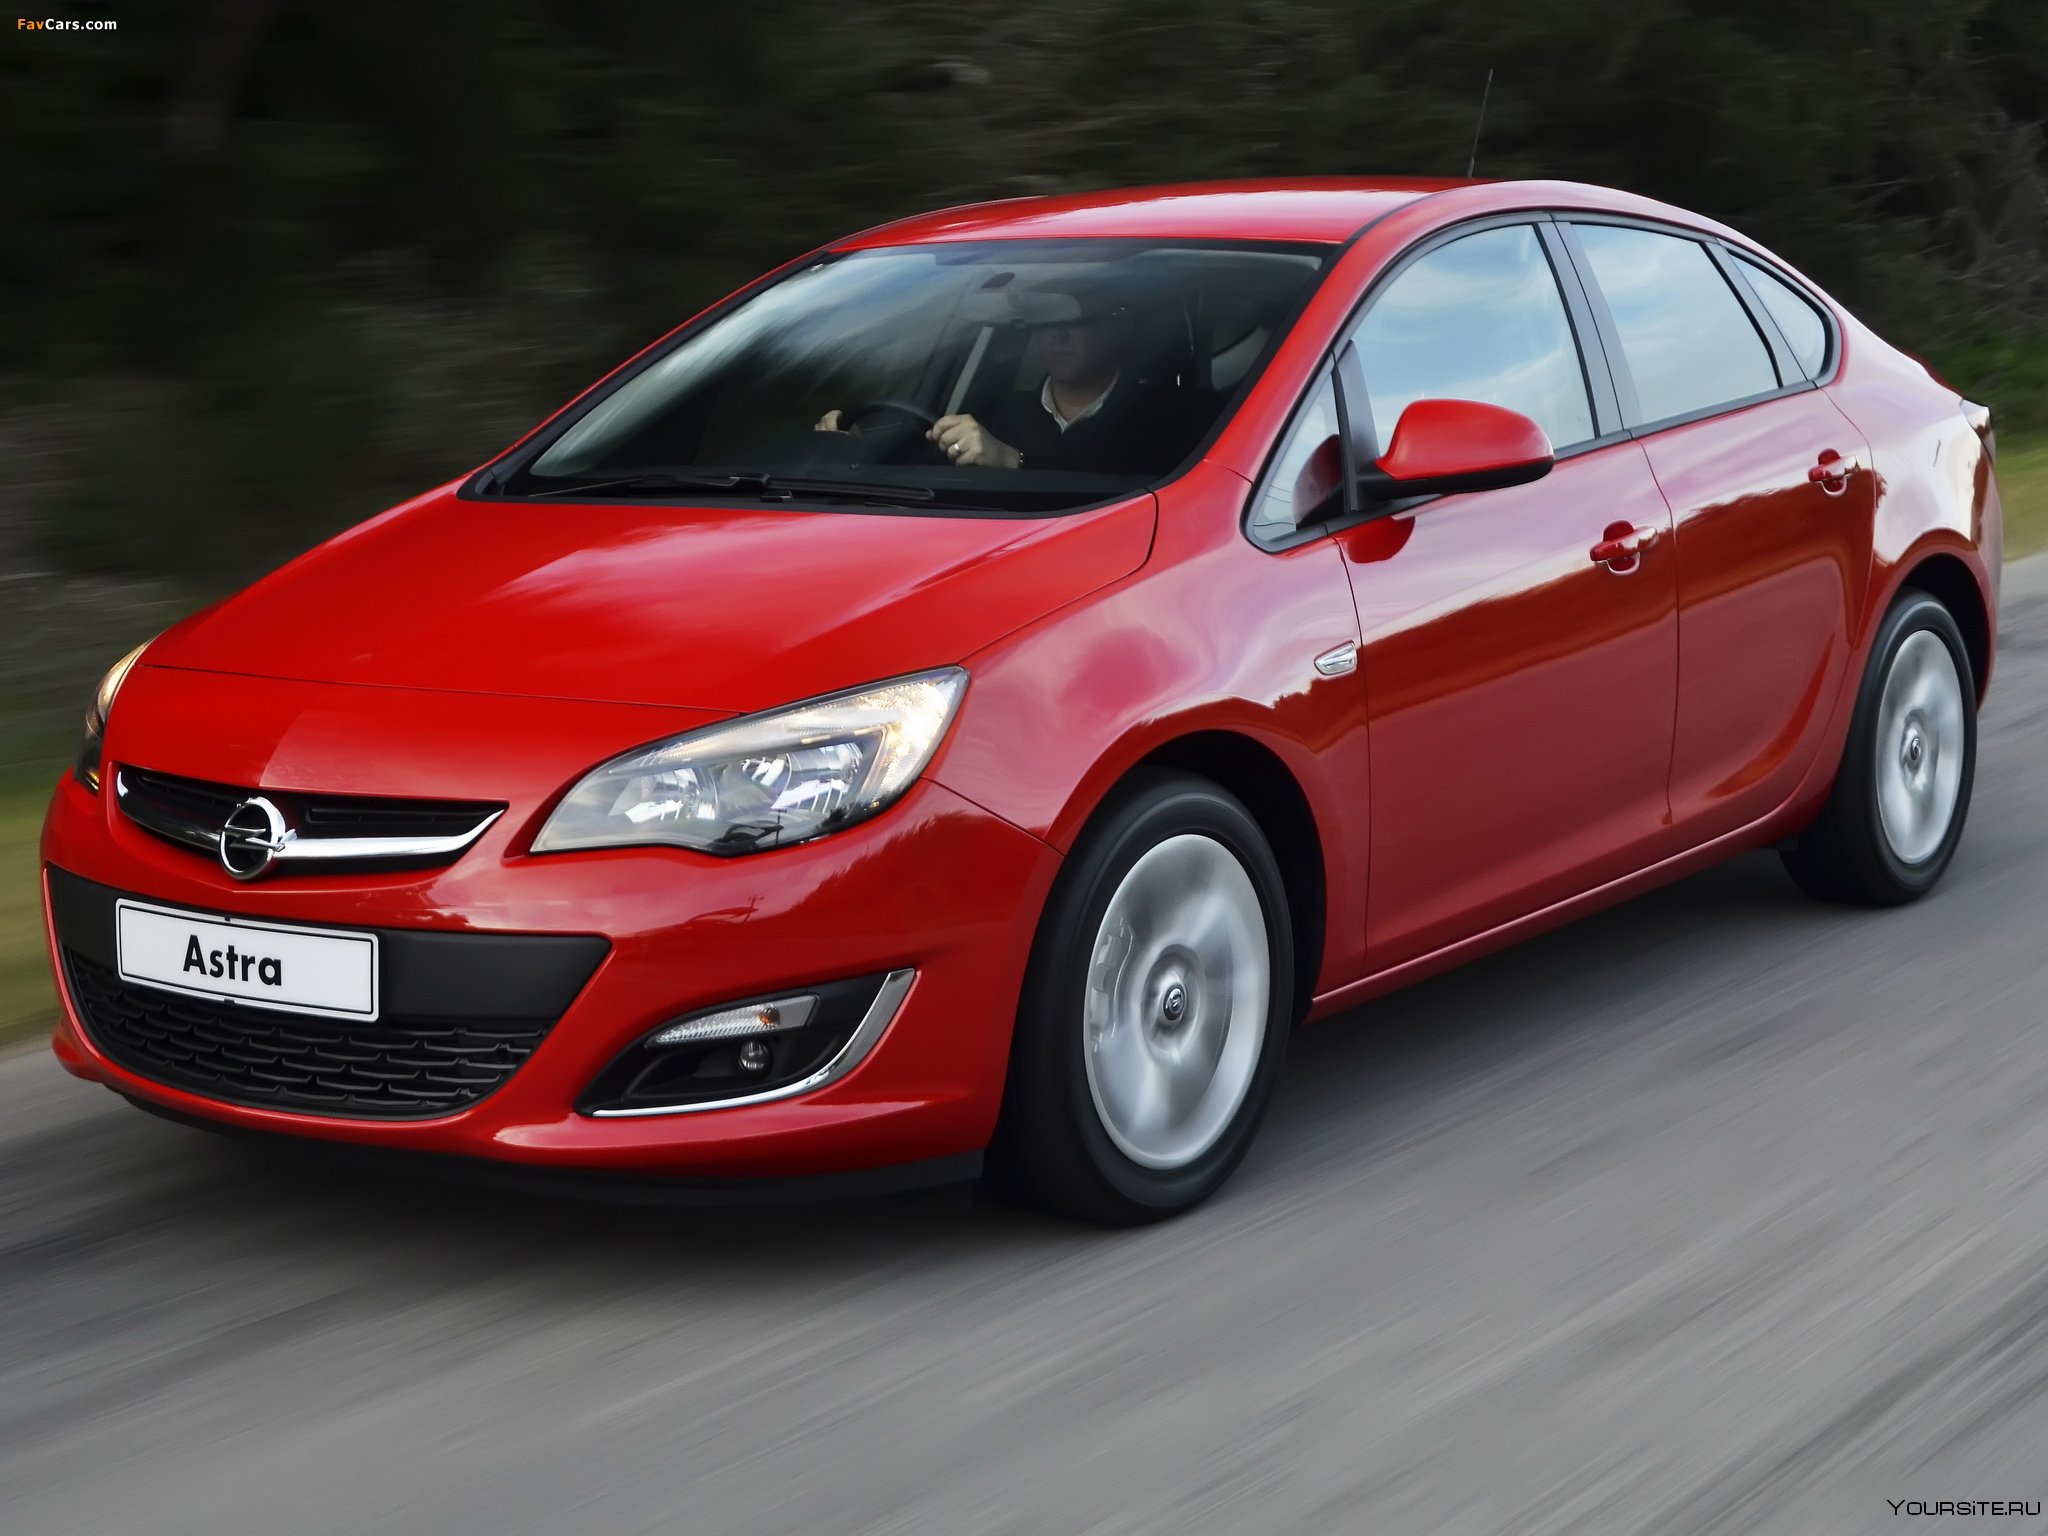 Astra 1.7 download. Opel Astra j 2015. Opel Astra j 2015 седан.